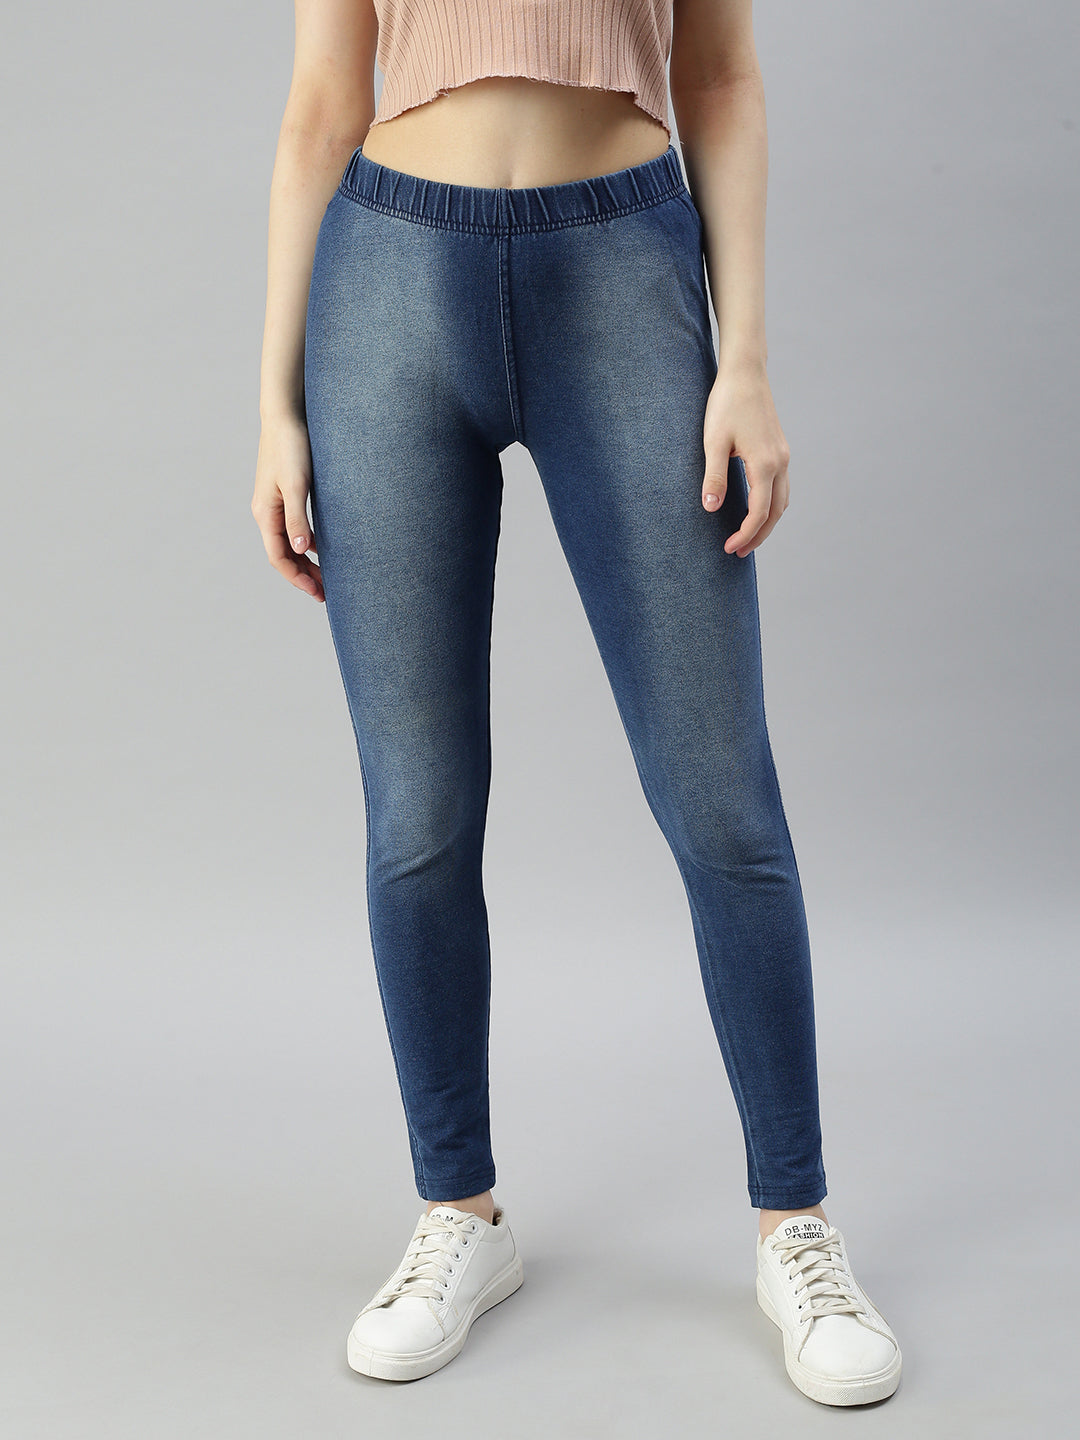 Ladies Jeggings Skinny Fit Coloured Stretchy Jeans